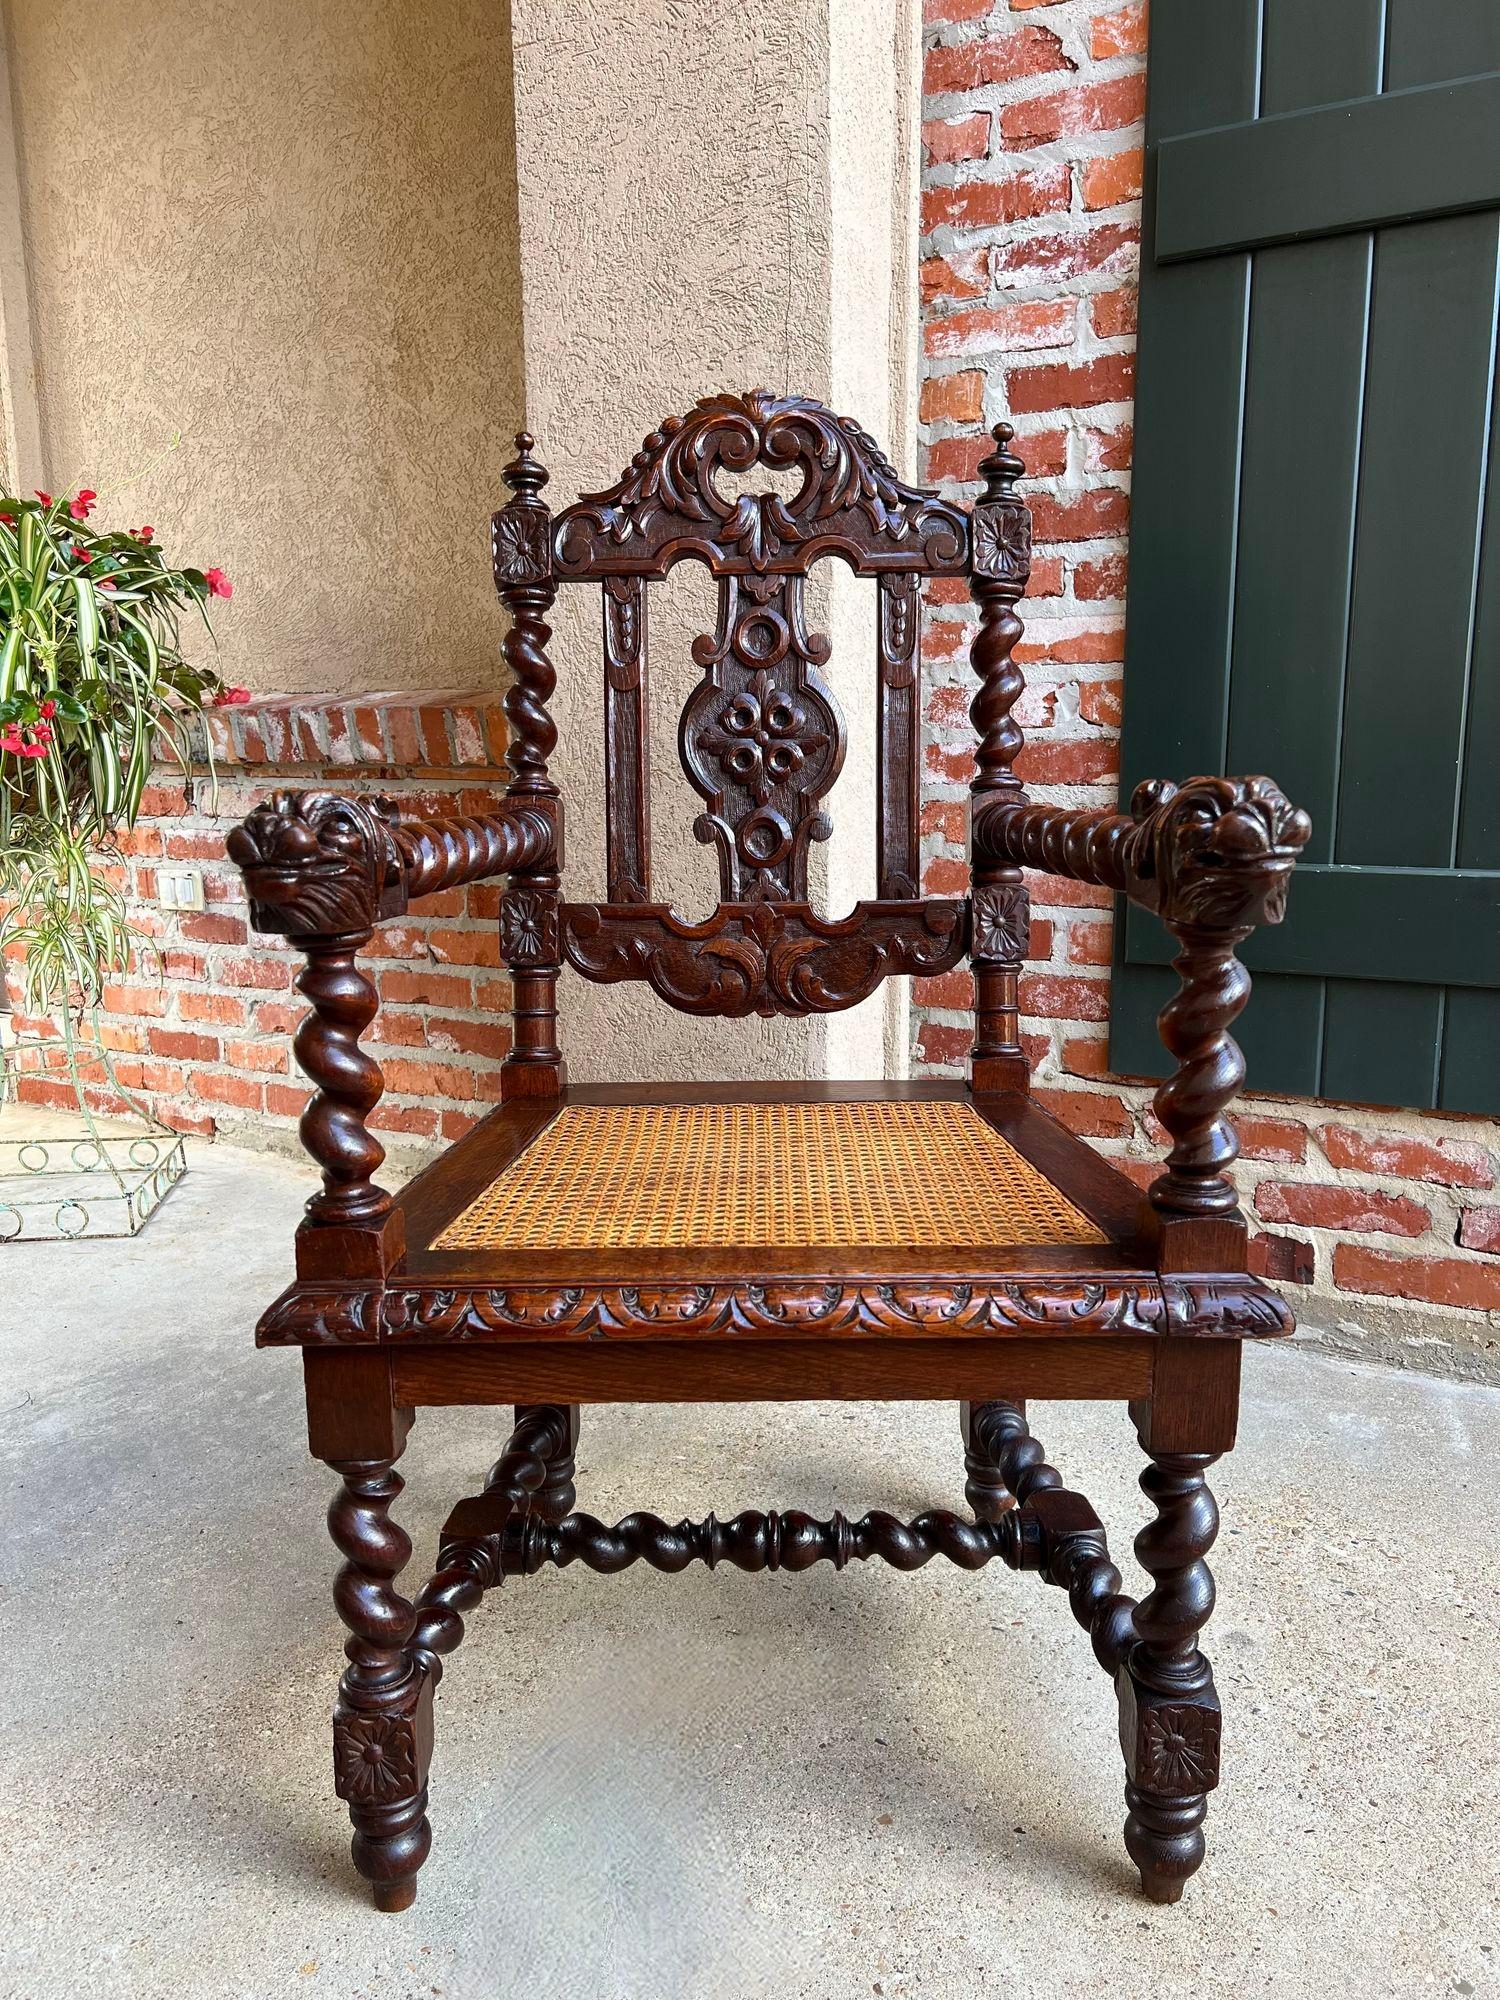 Antique English arm chair carved oak throne barley twist renaissance cane seat

 Direct from England, a gorgeous antique English arm chair with beautiful hand carved features! British BARLEY TWIST provides a royal impression, with barley twist